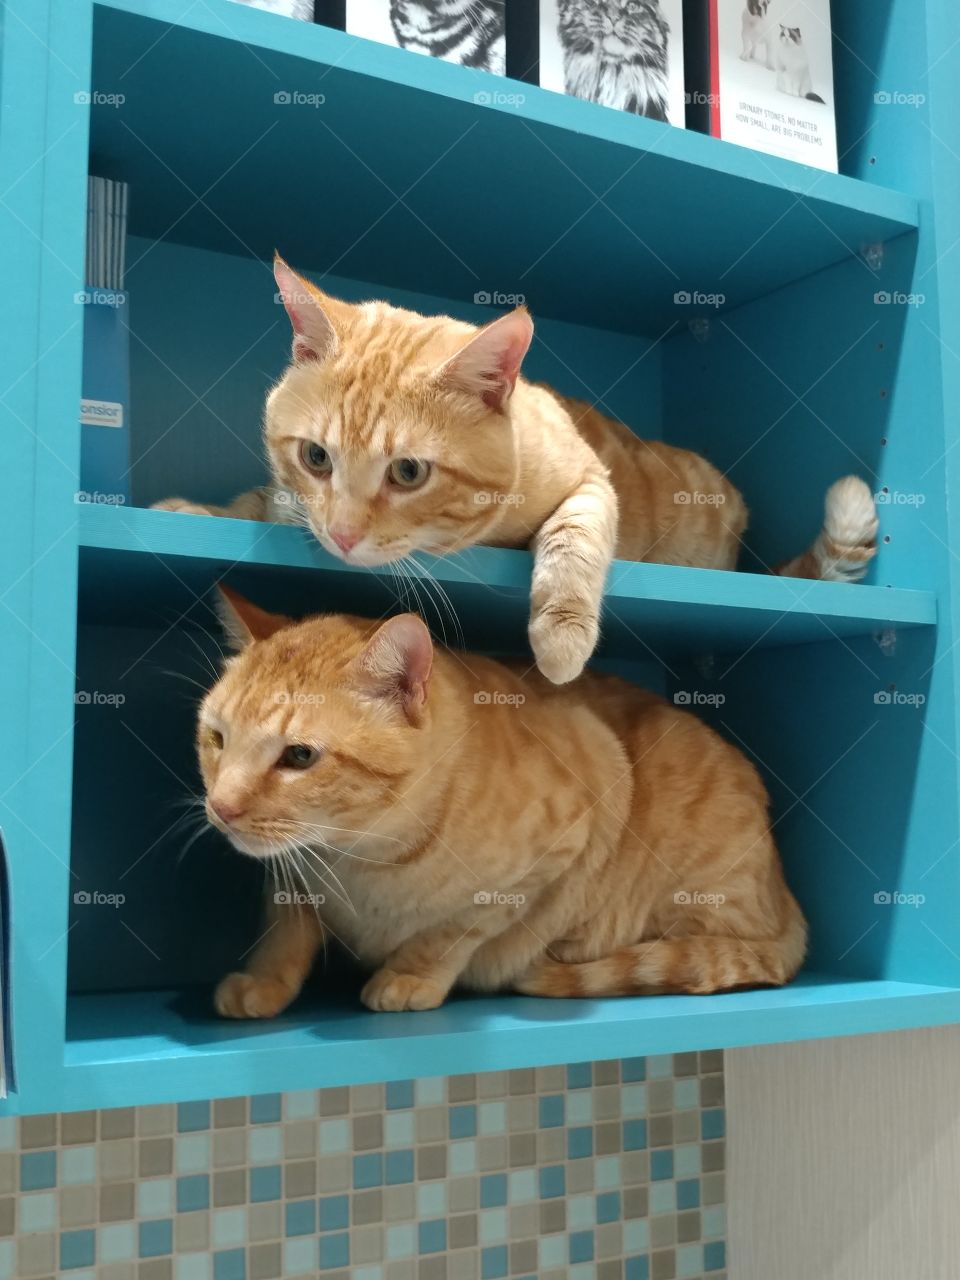 Two orange tabbys waiting anxiously for the veterinarian on a blue shelf.